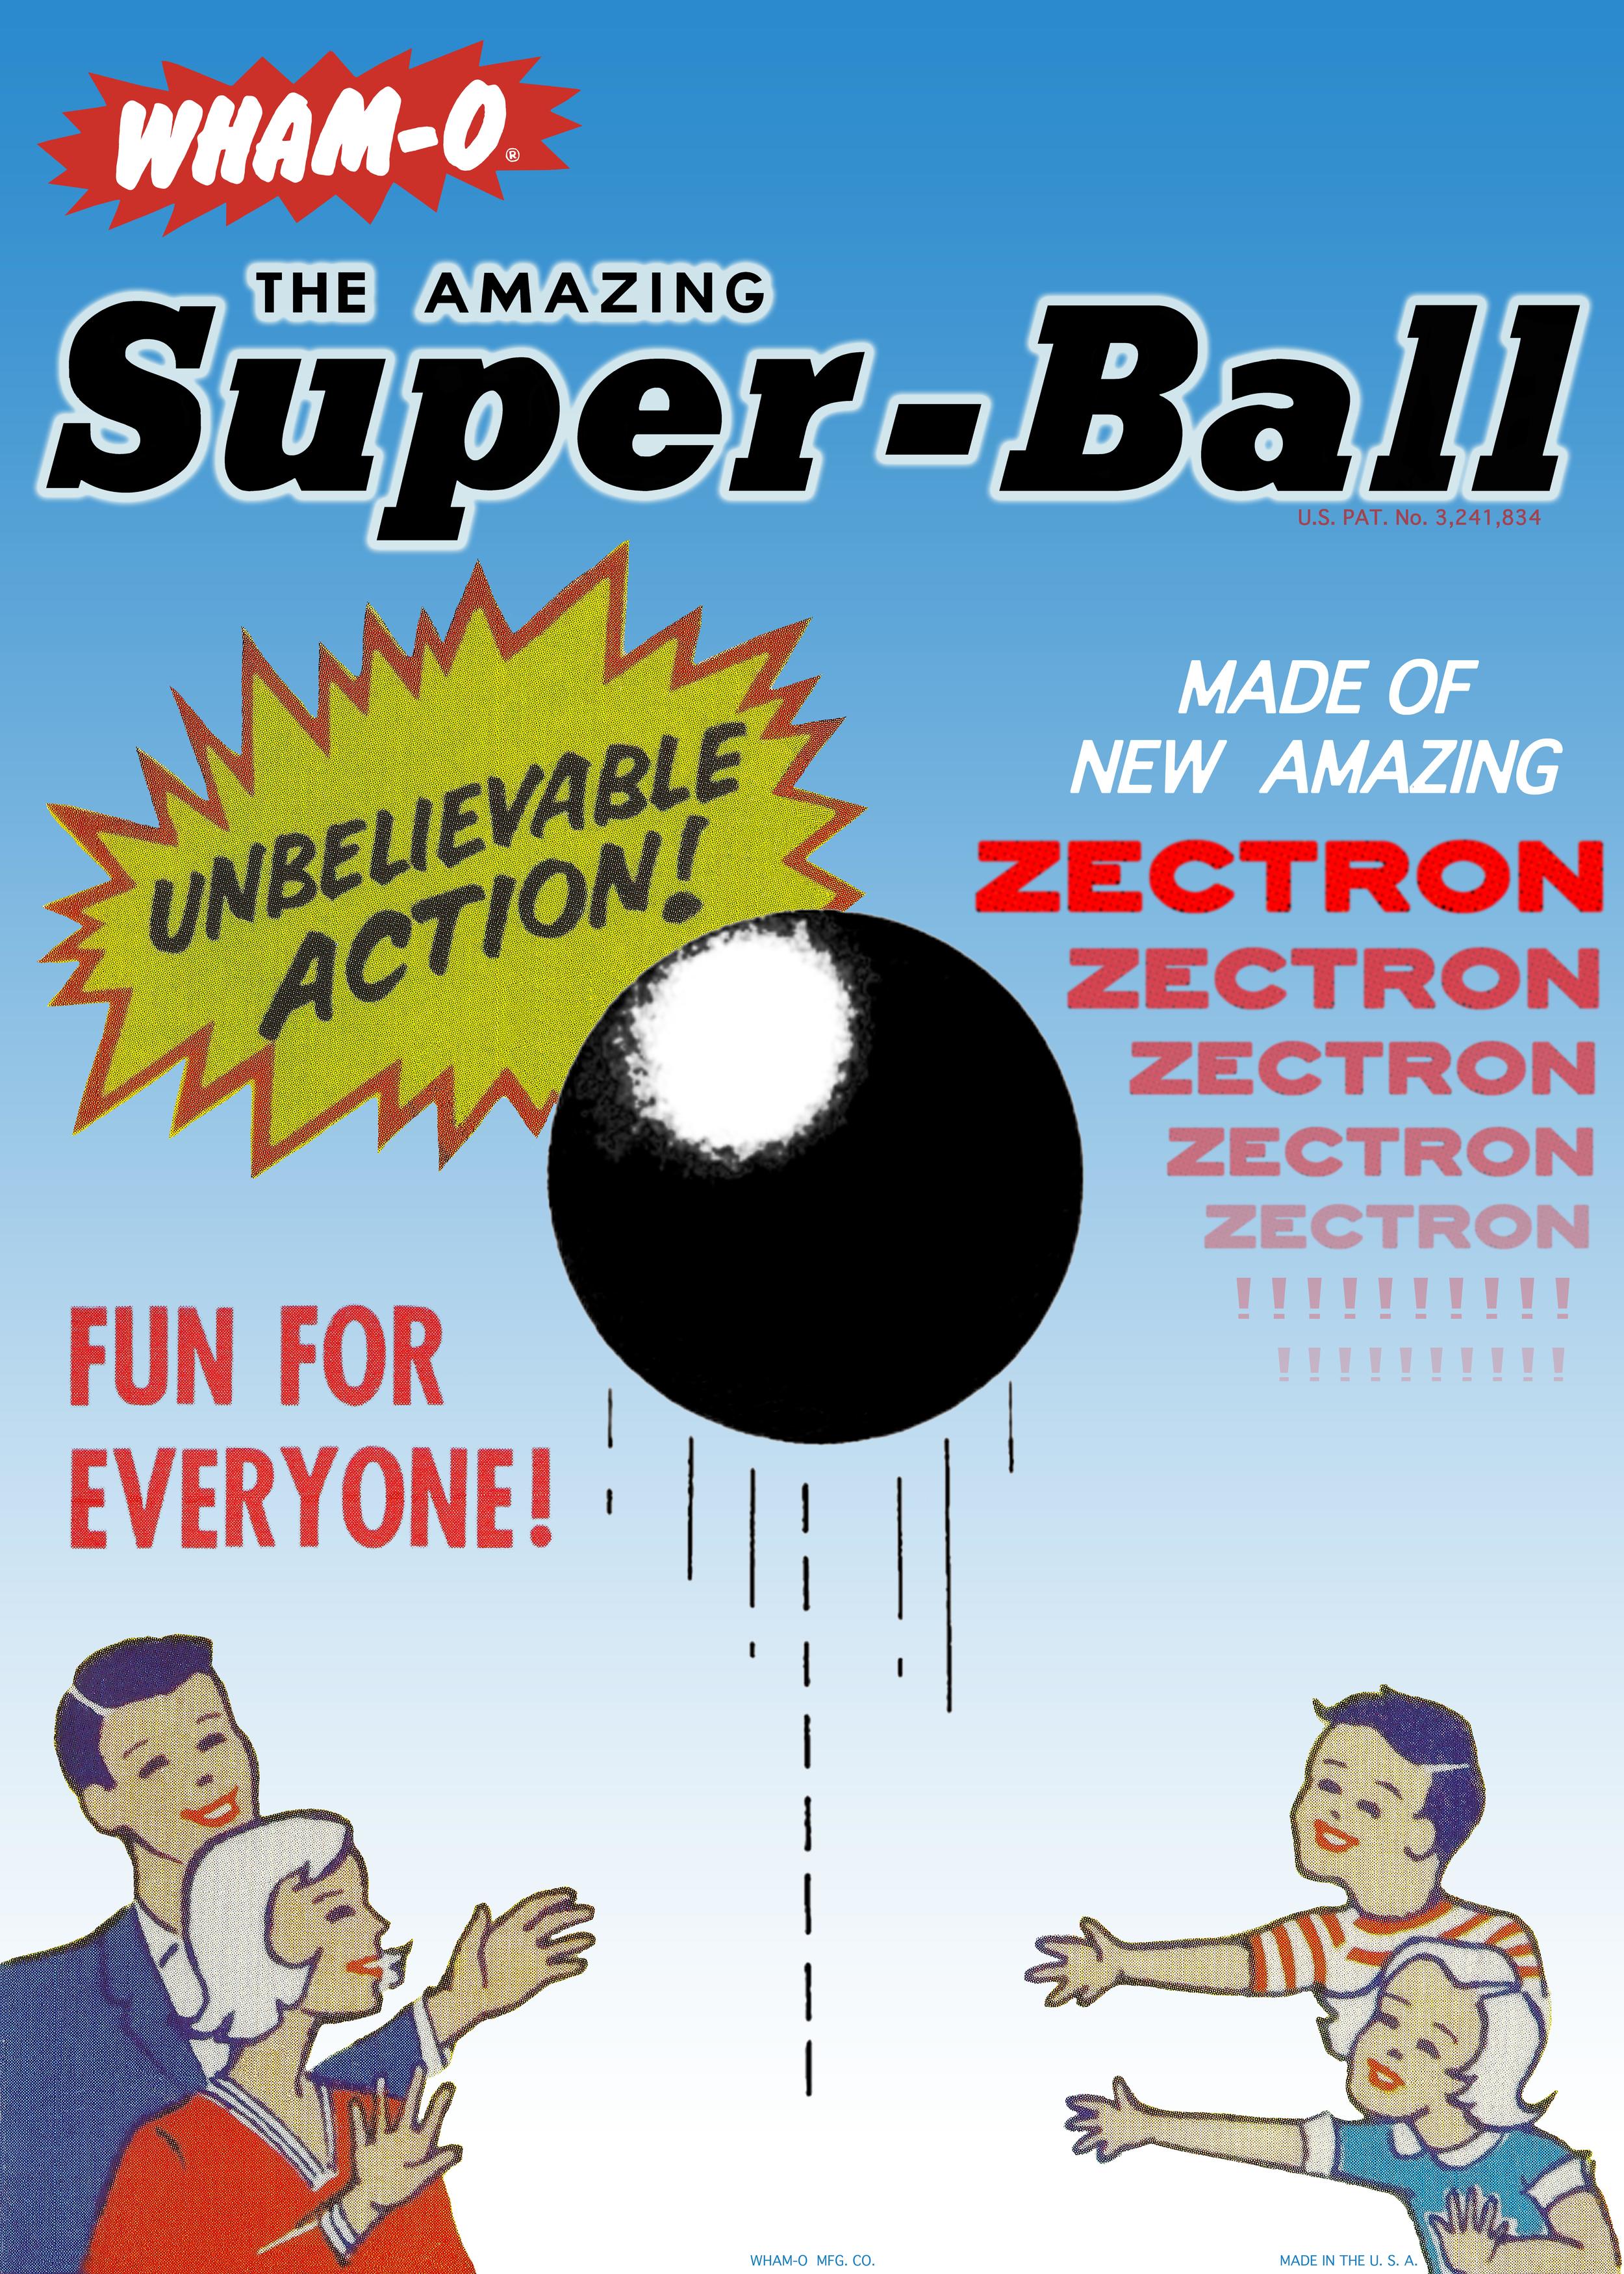  “Untitled (Super-Ball Family)” Poster  2013  Digital and hand-screened print, Ed. of 5 + 1AP  31 7/8"x 24"   Editions available  